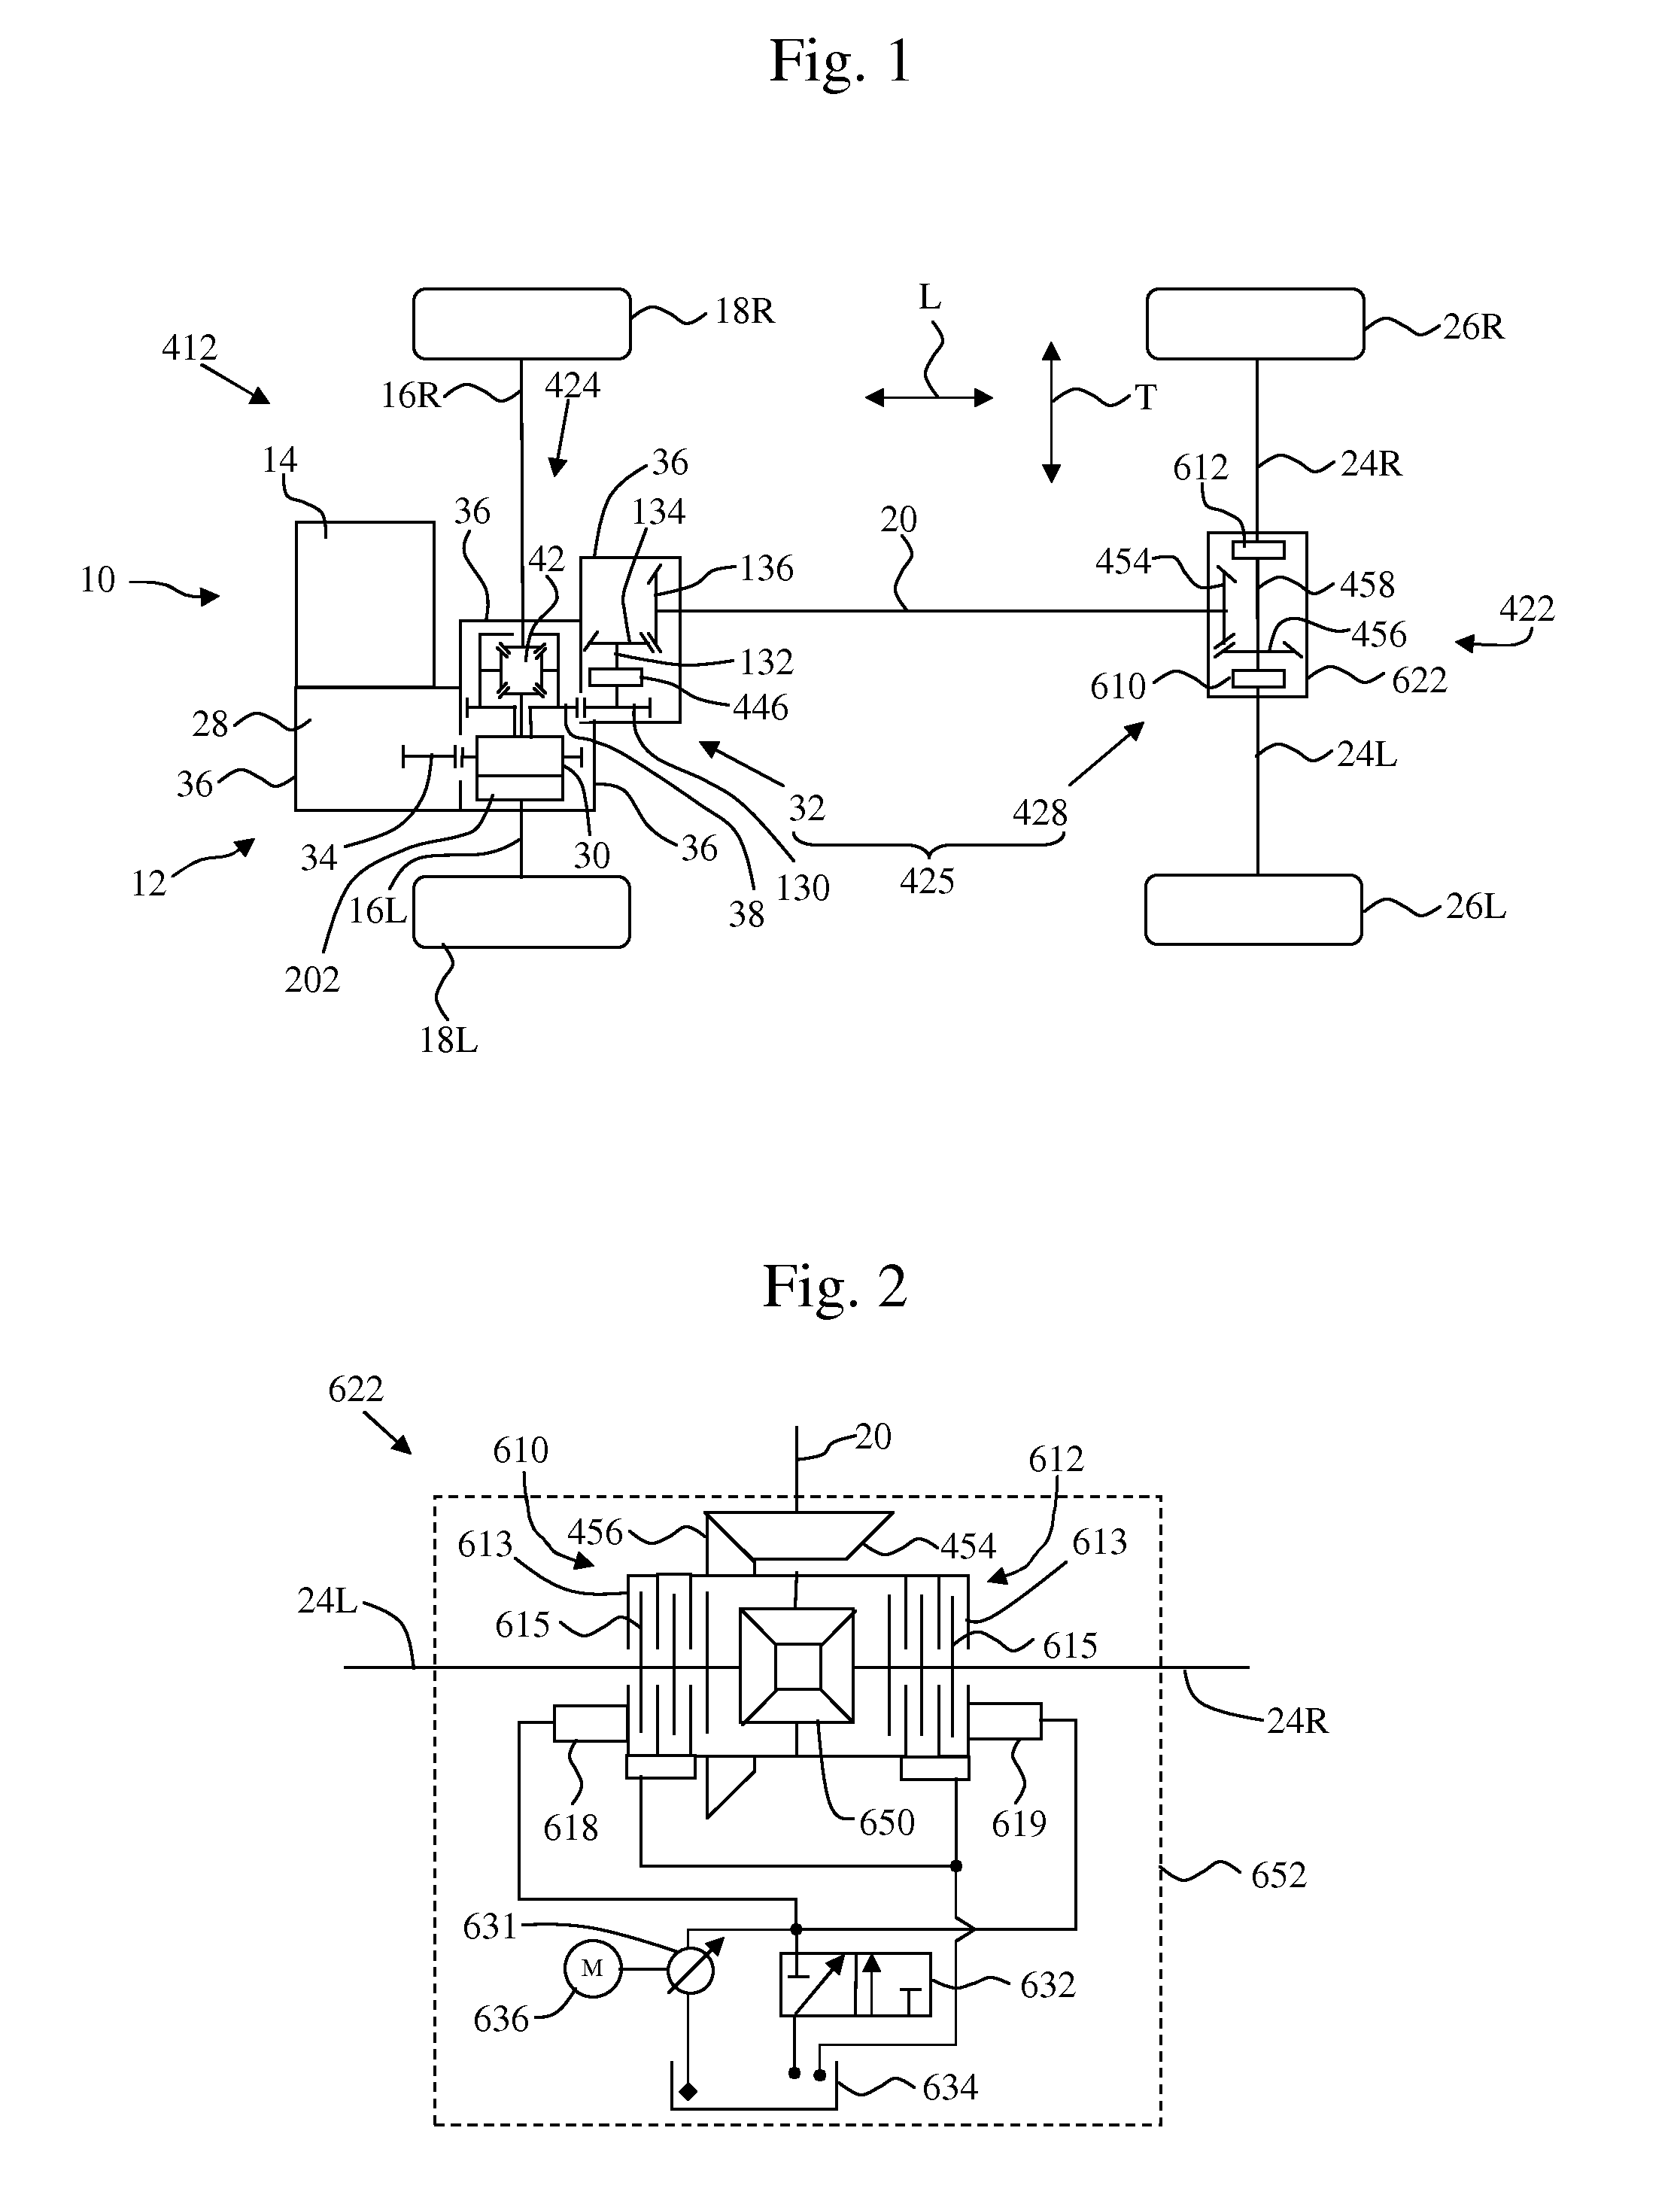 Control system and method for automatic control of selection of on-demand all-wheel drive assembly for a vehicle drivetrain